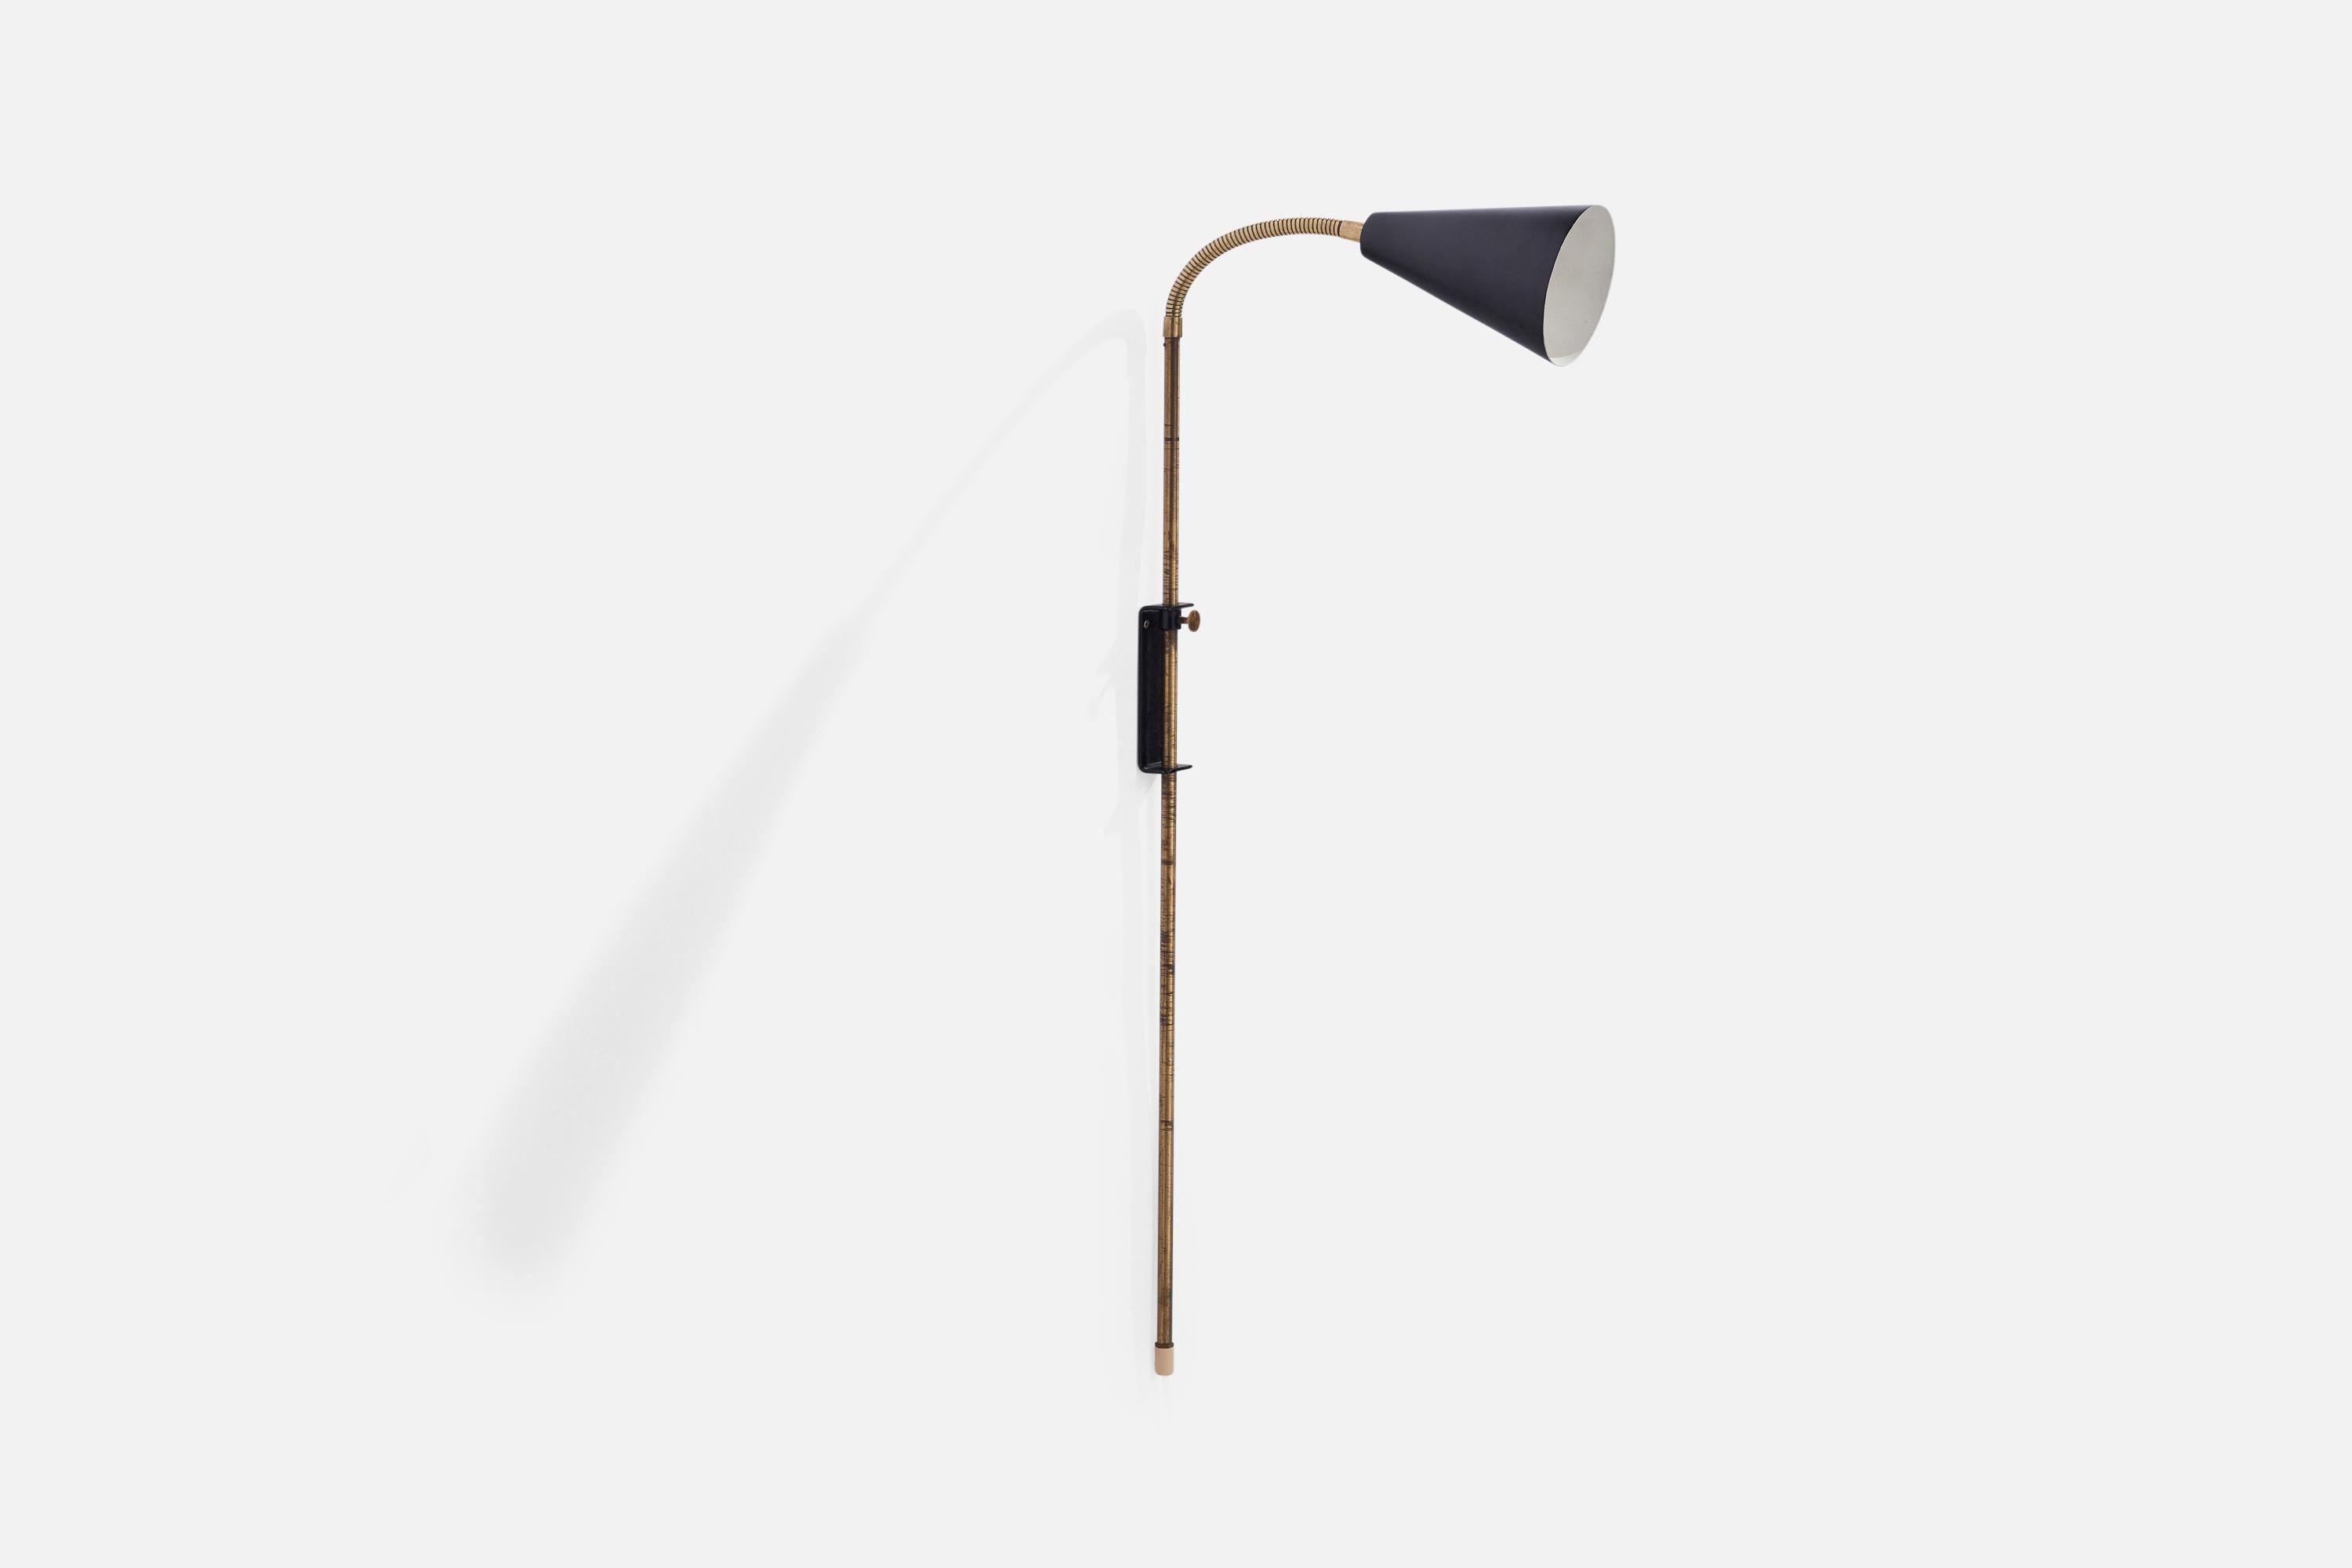 An adjustable brass and black-lacquered metal wall light designed and produced in Sweden, 1950s.

Please note lamp is configured for plug in, with cord feeding from bottom of stem.

Overall Dimensions (inches): 42” H x 4.5” W x 11” D
Back Plate